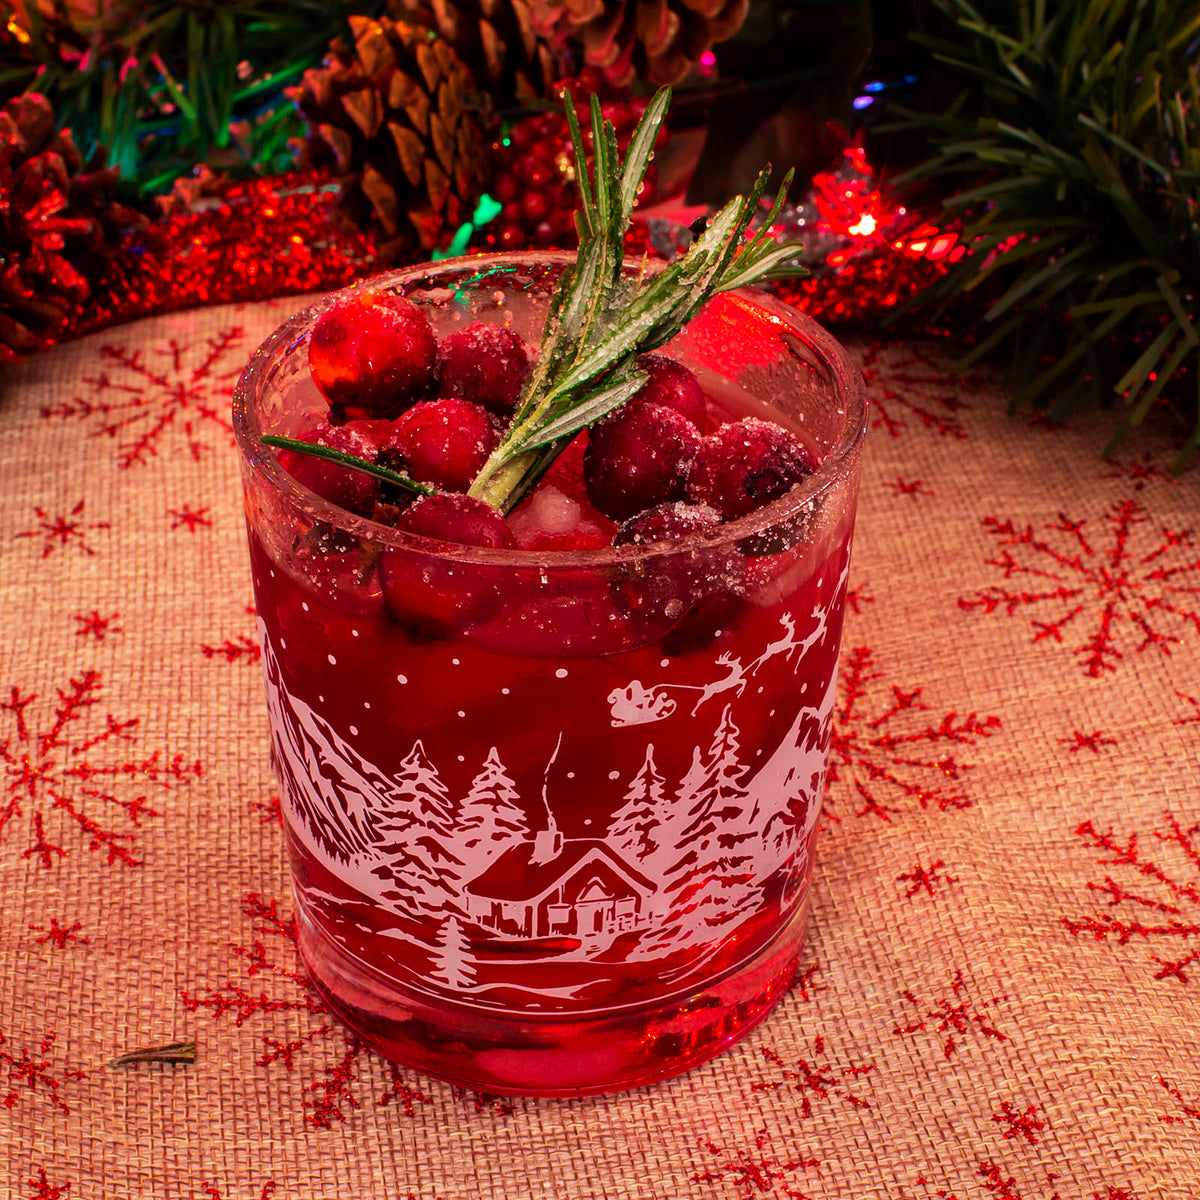 https://www.barproductsus.shop/wp-content/uploads/1692/26/barconic-glassware-christmas-cabin-old-fashion-glass-10-ounce-barproducts-com-find-the-latest-trends-and-shop_2.jpg